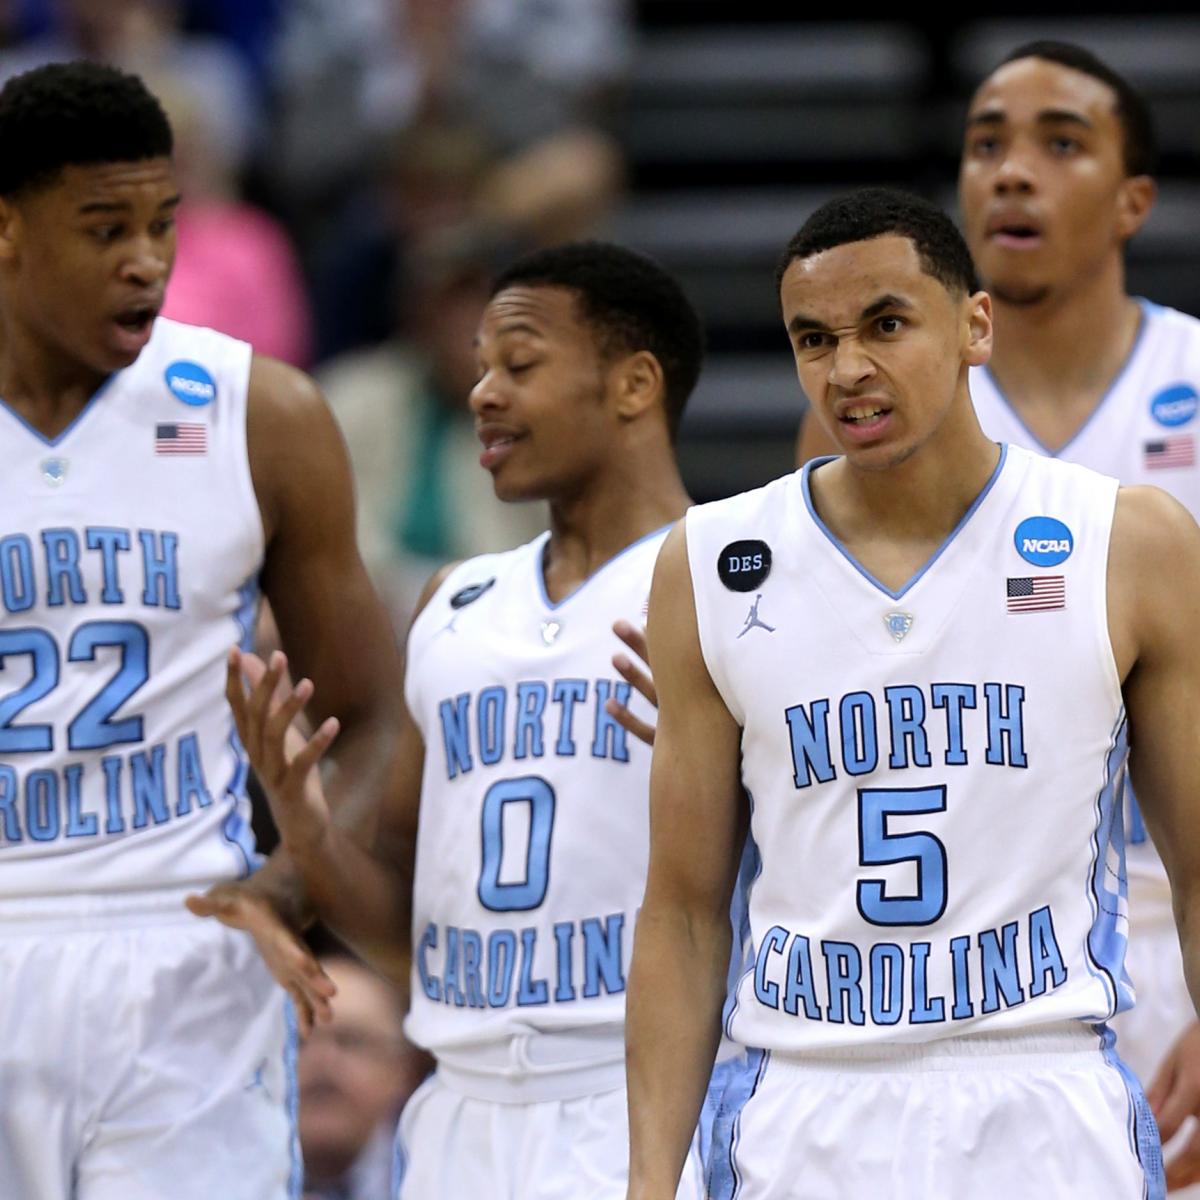 UNC Basketball The Top 5 Highlights from UNC's Postseason News